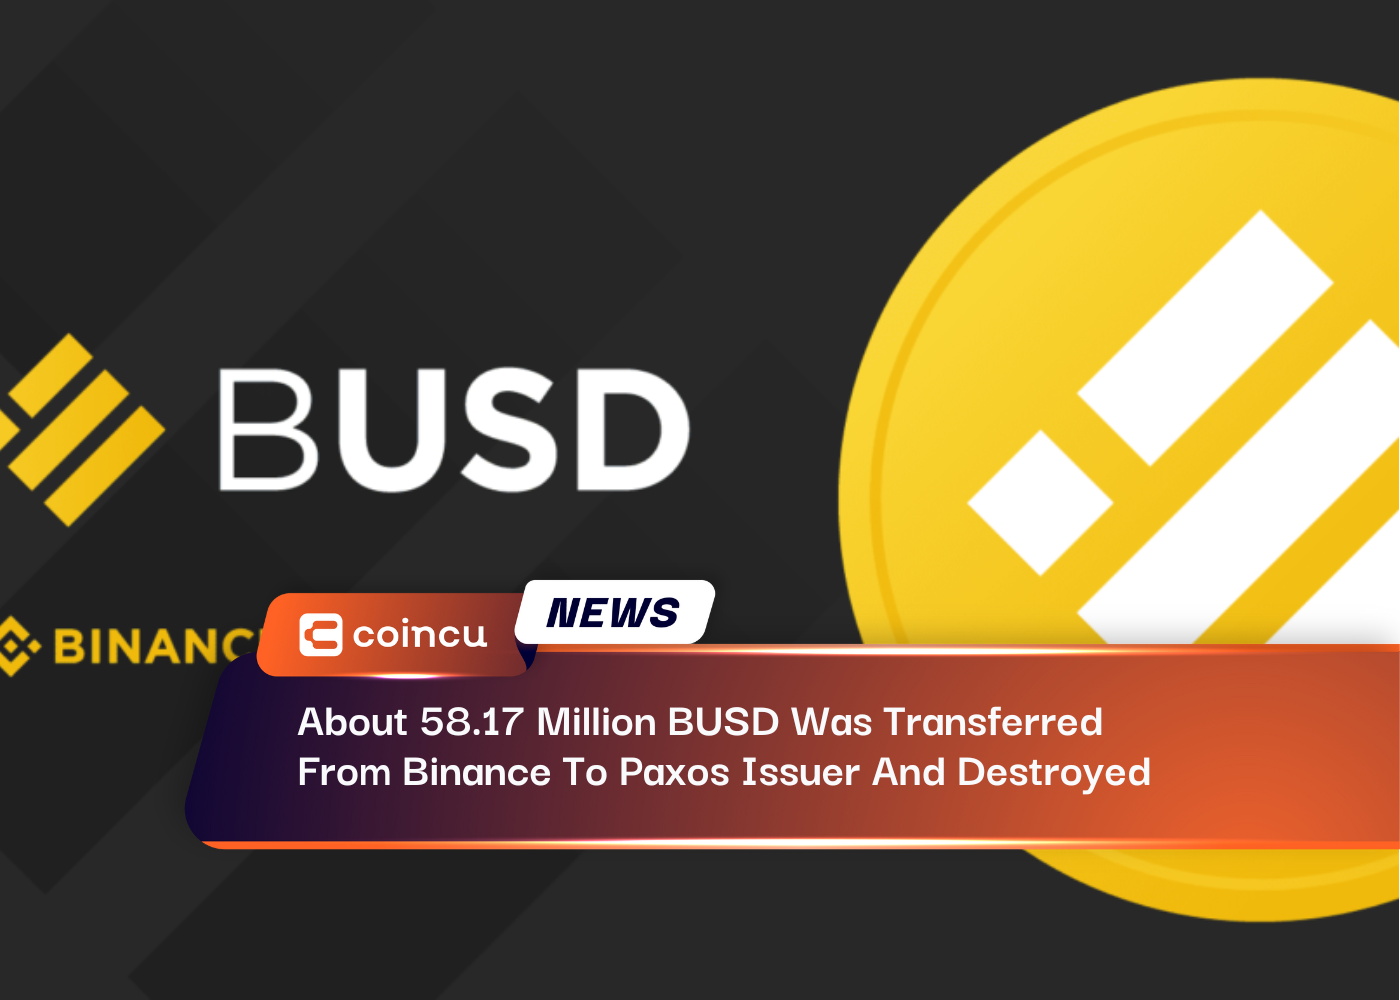 About 58.17 Million BUSD Was Transferred From Binance To Paxos Issuer And Destroyed